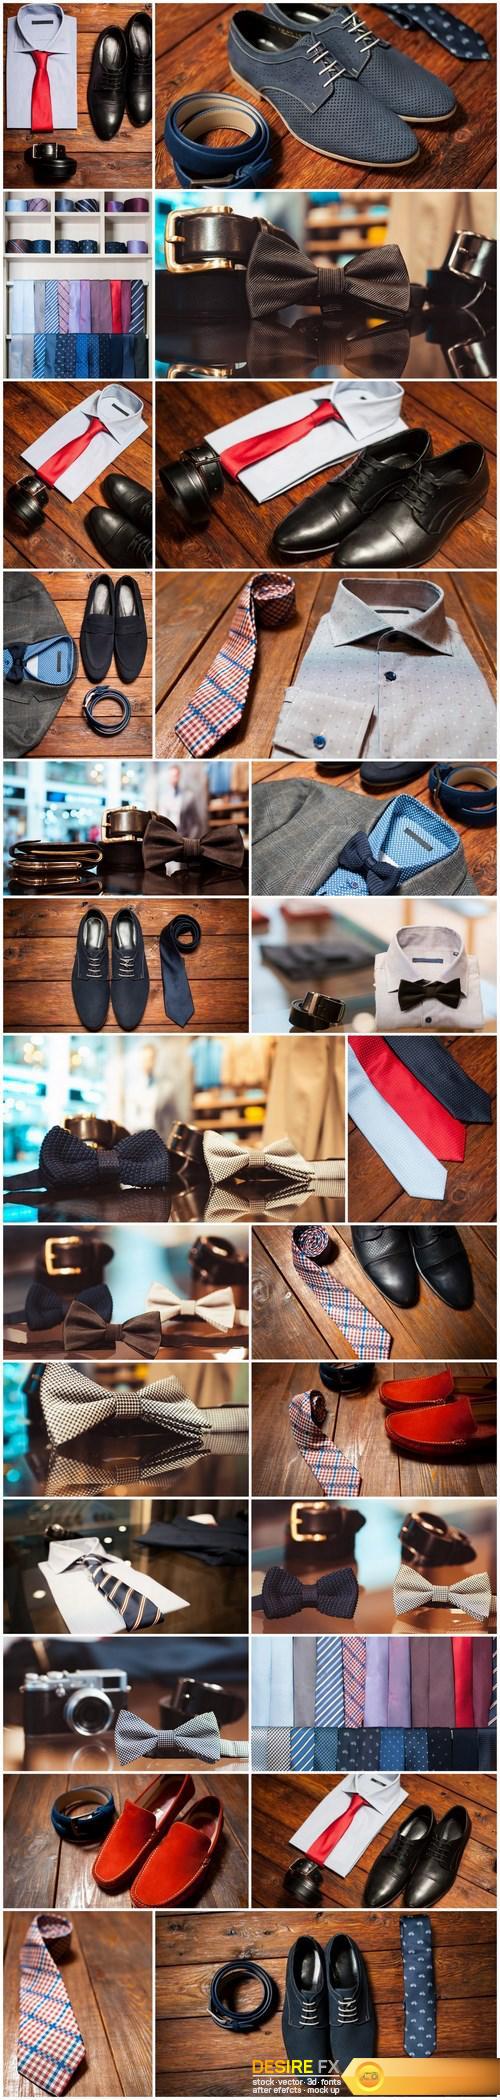 Men's Clothing and Accessories 2 - 26xUHQ JPEG Photo Stock